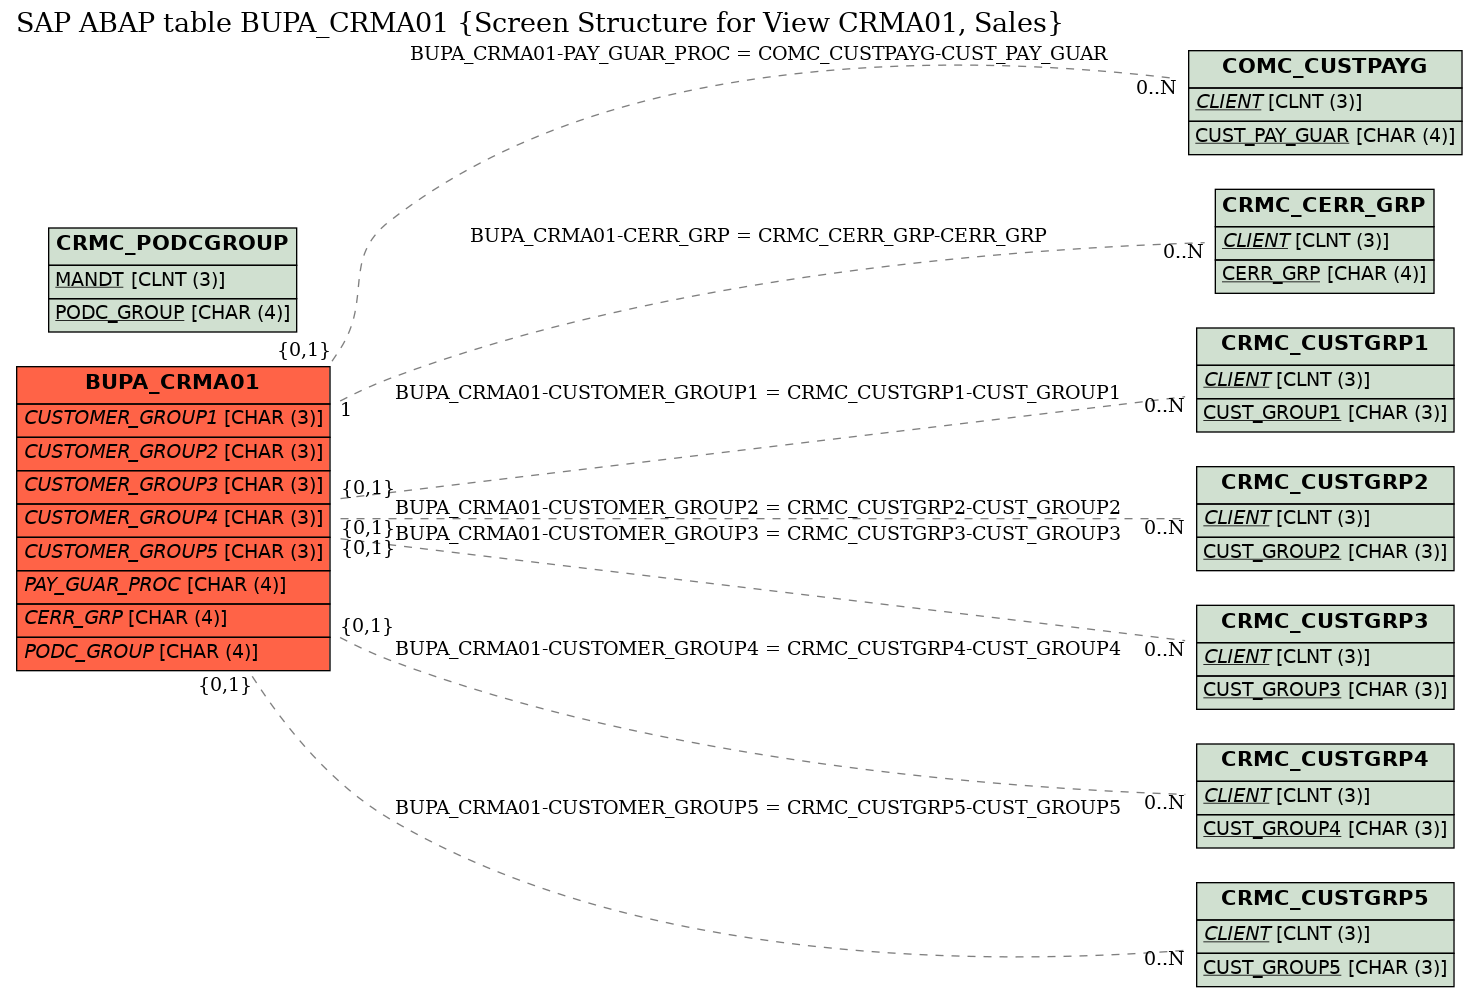 E-R Diagram for table BUPA_CRMA01 (Screen Structure for View CRMA01, Sales)